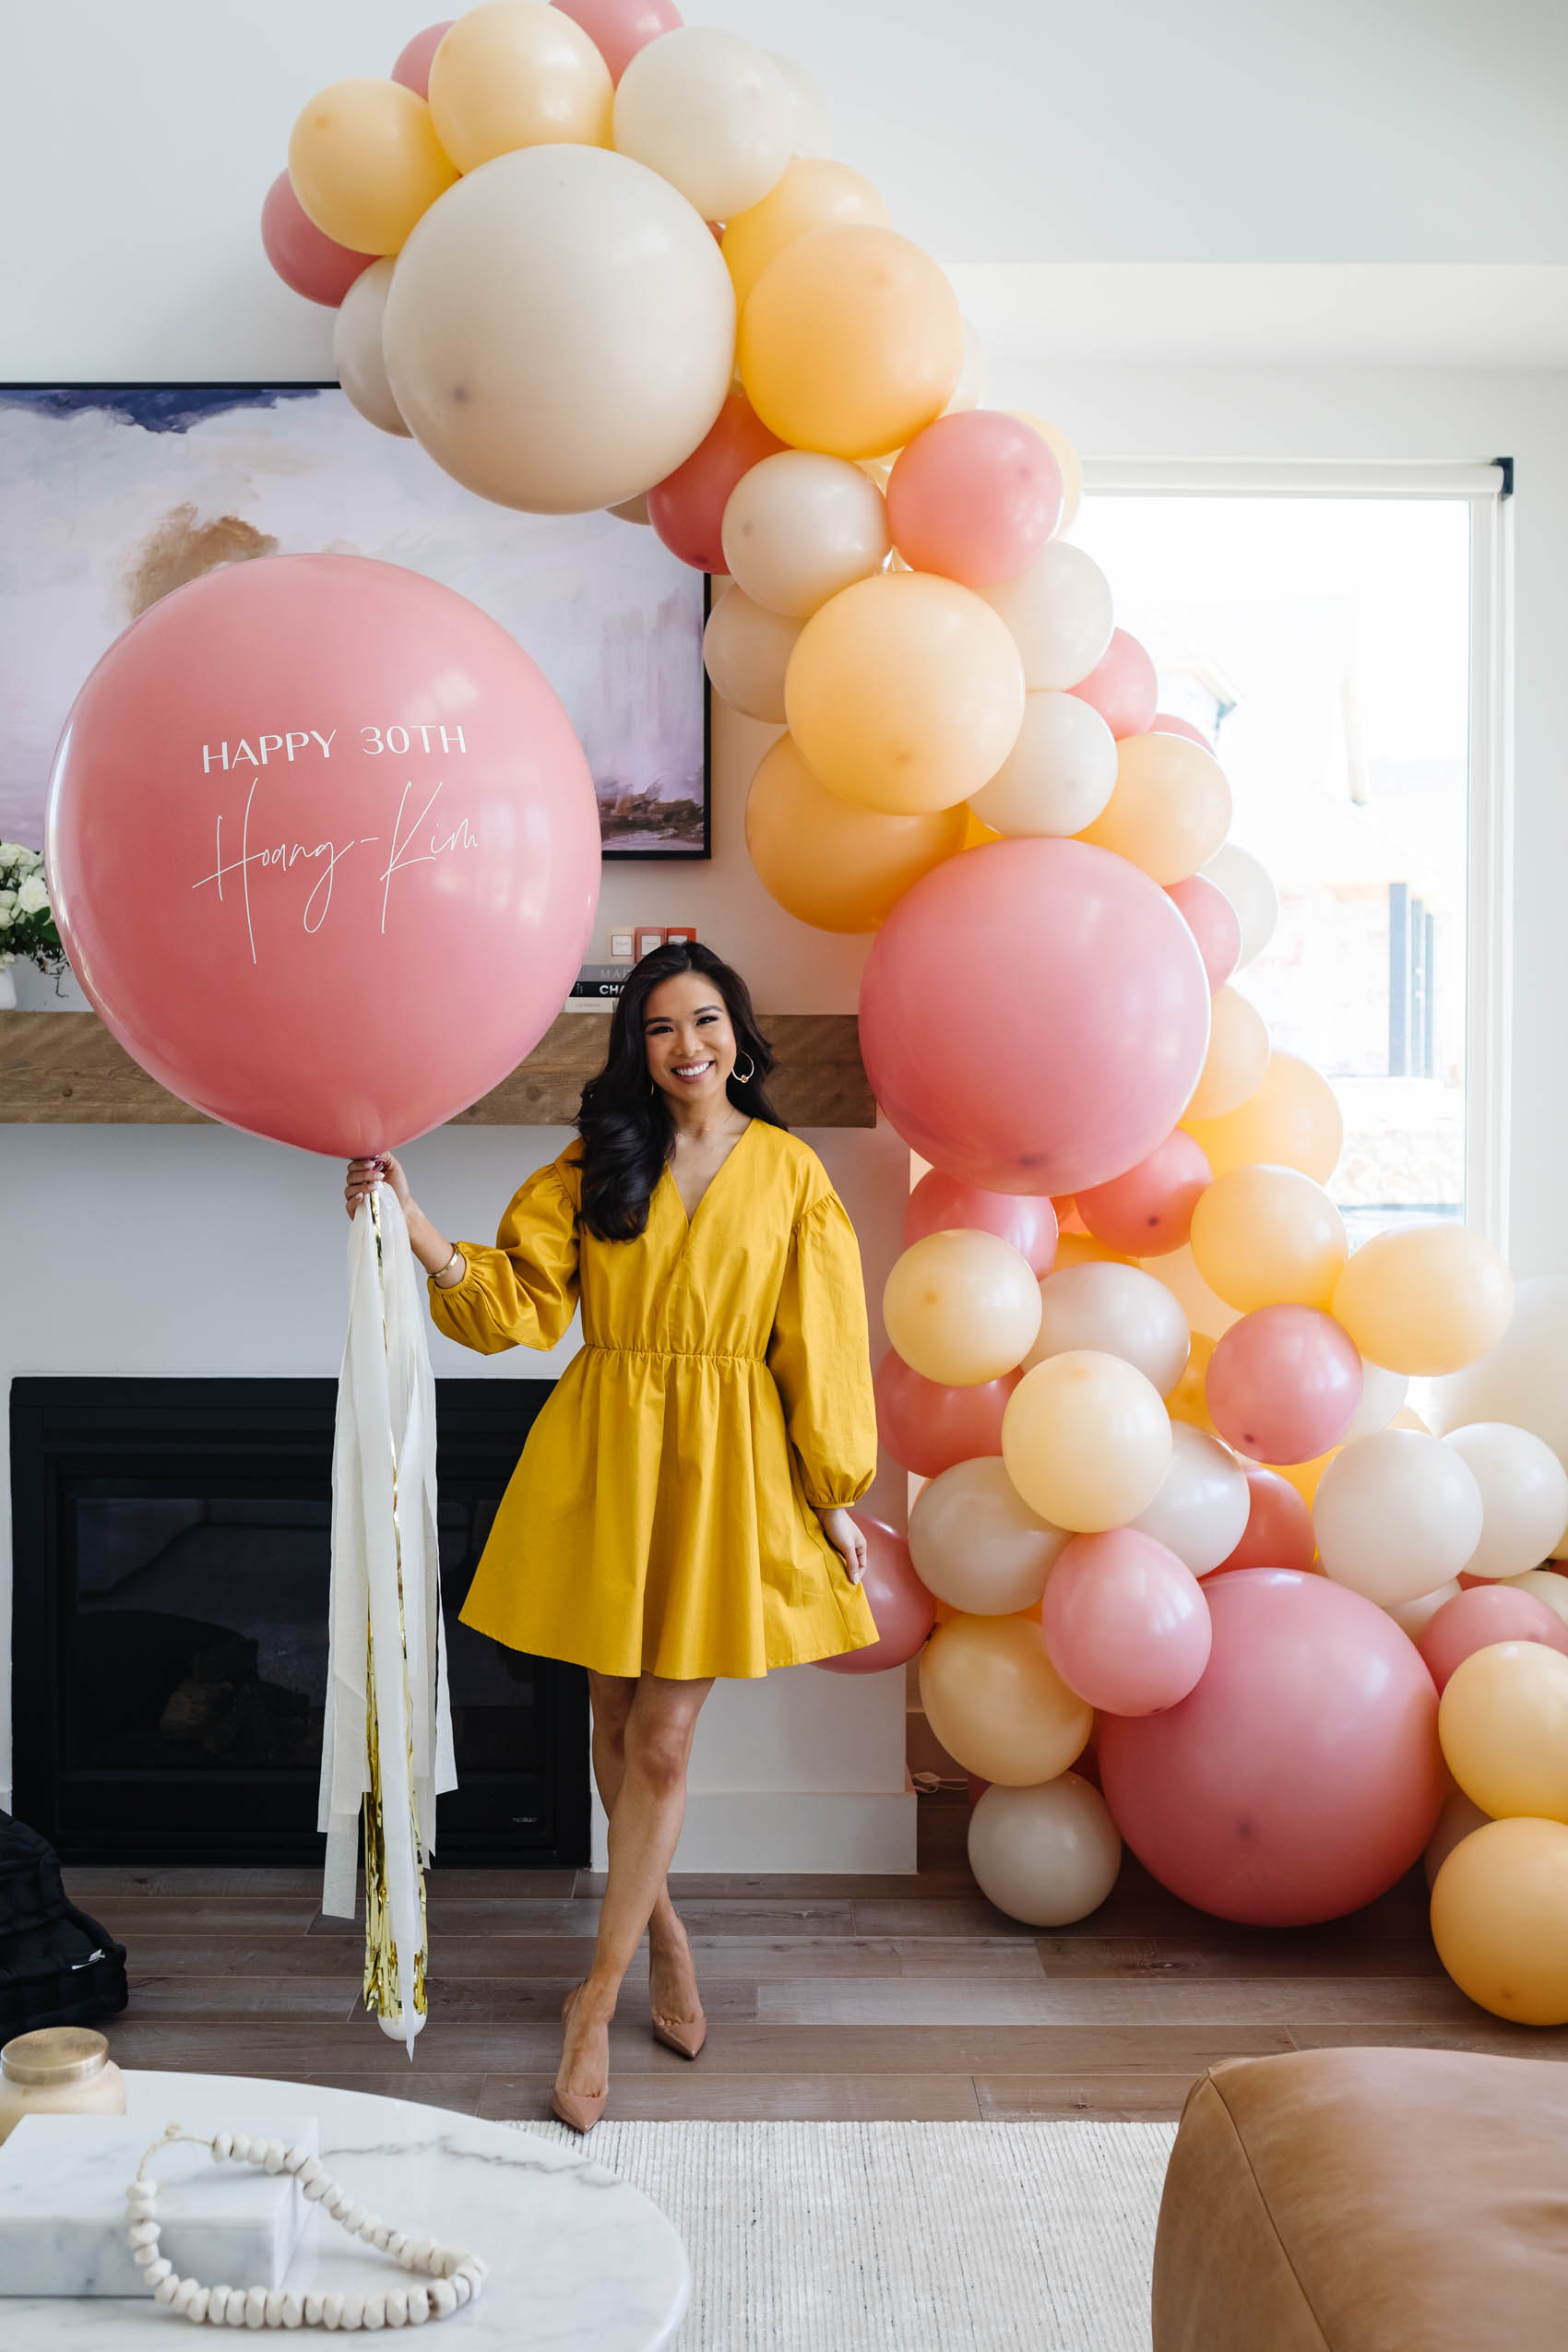 Blogger Hoang-Kim celebrates her 30th Birthday Party at Home with a balloon garland from Lushra and custom jumbo balloon wearing a yellow dress in her Dallas home